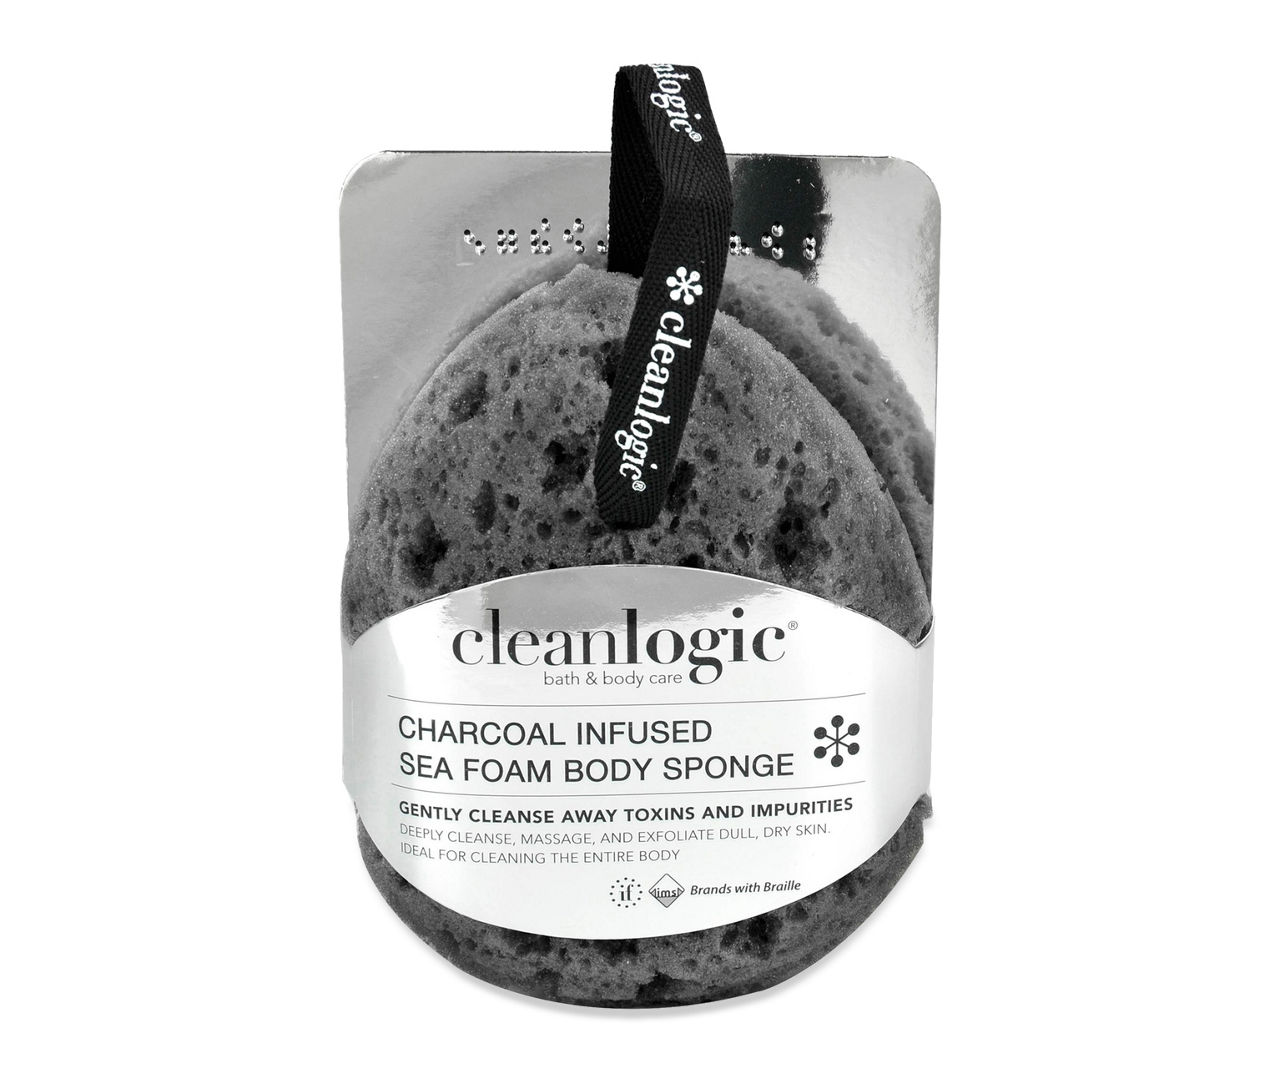 SEASATIONALS Sea Sponge Cleaning Solution - Scented